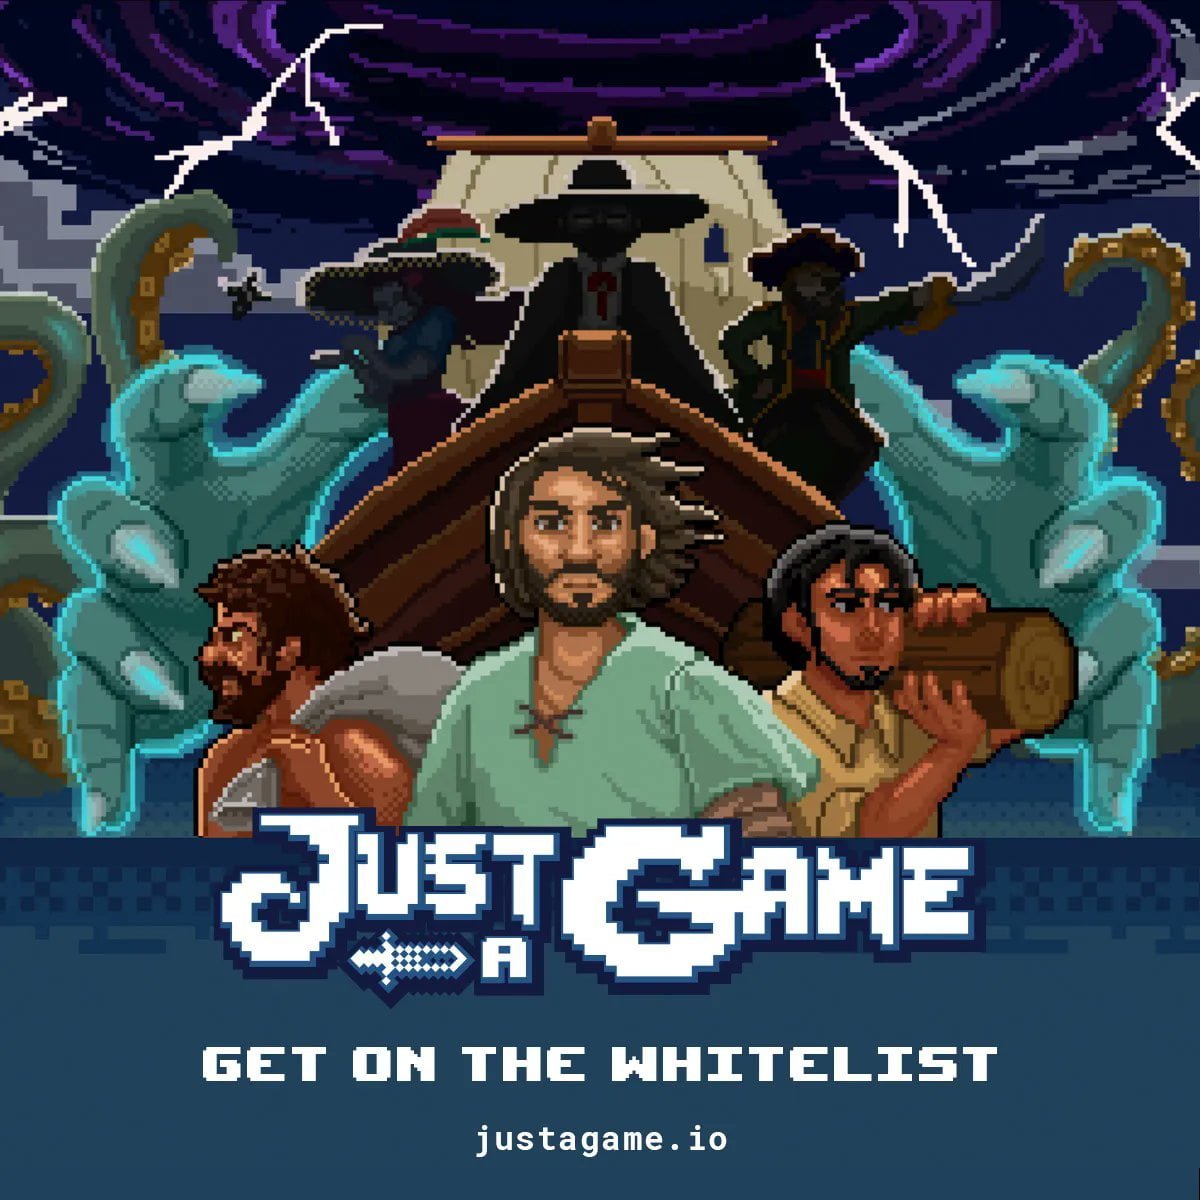 Interview with Ian Manson, Storyboarding and World Builder at JustAGame 9